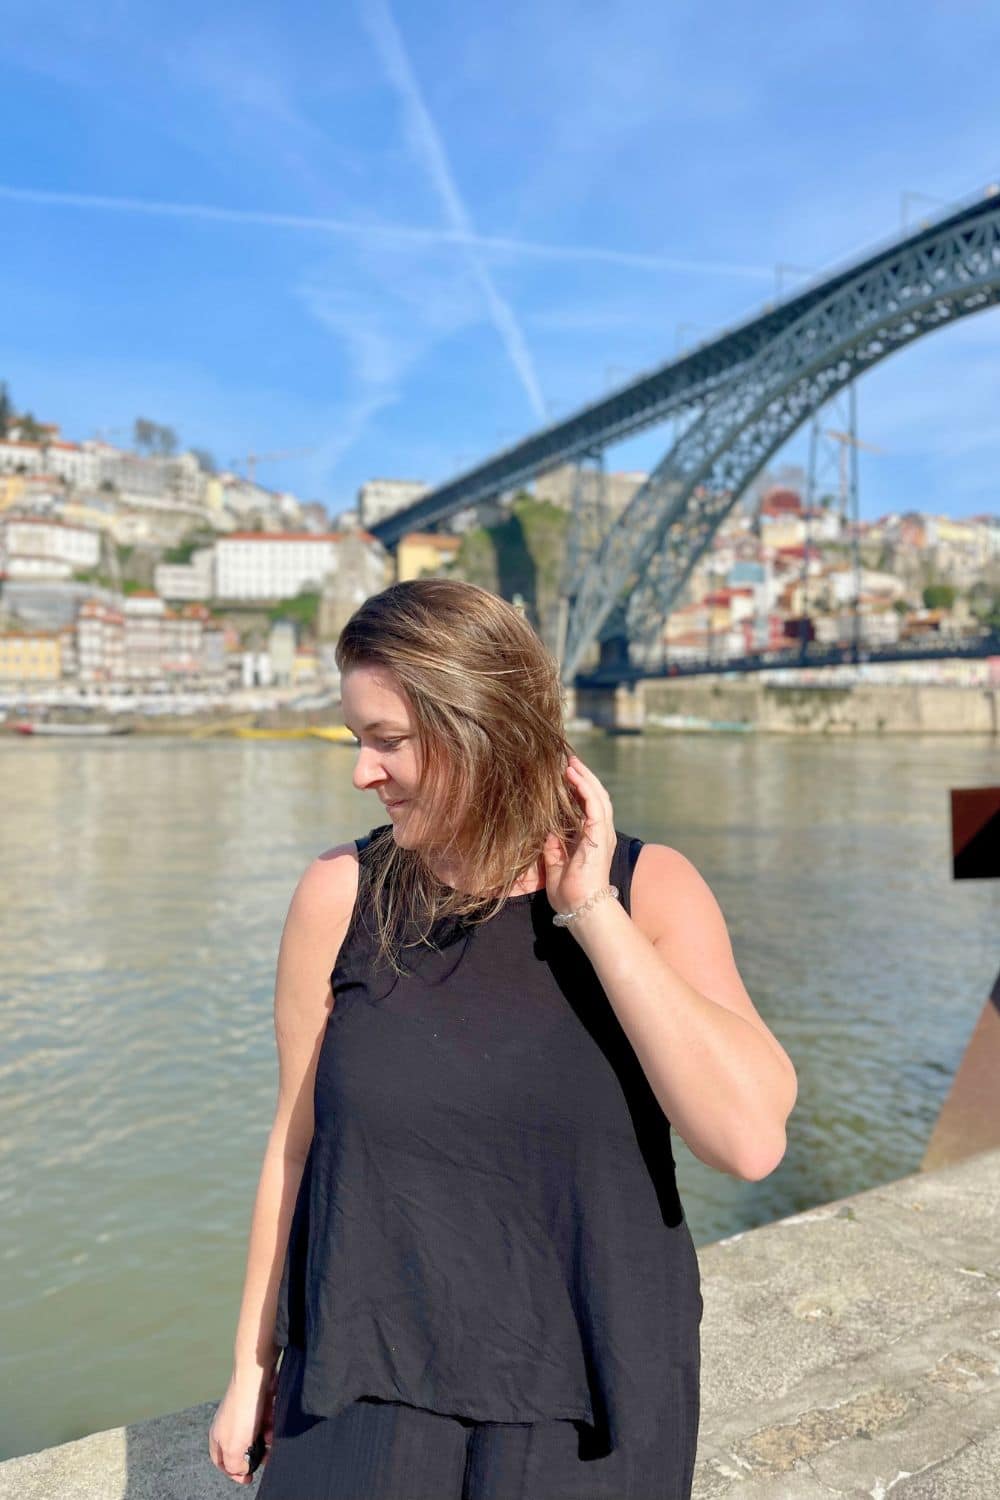 A woman in a casual black outfit touches her hair, smiling gently, with the serene Douro River and the Dom Luís I Bridge in the background on a sunny day.